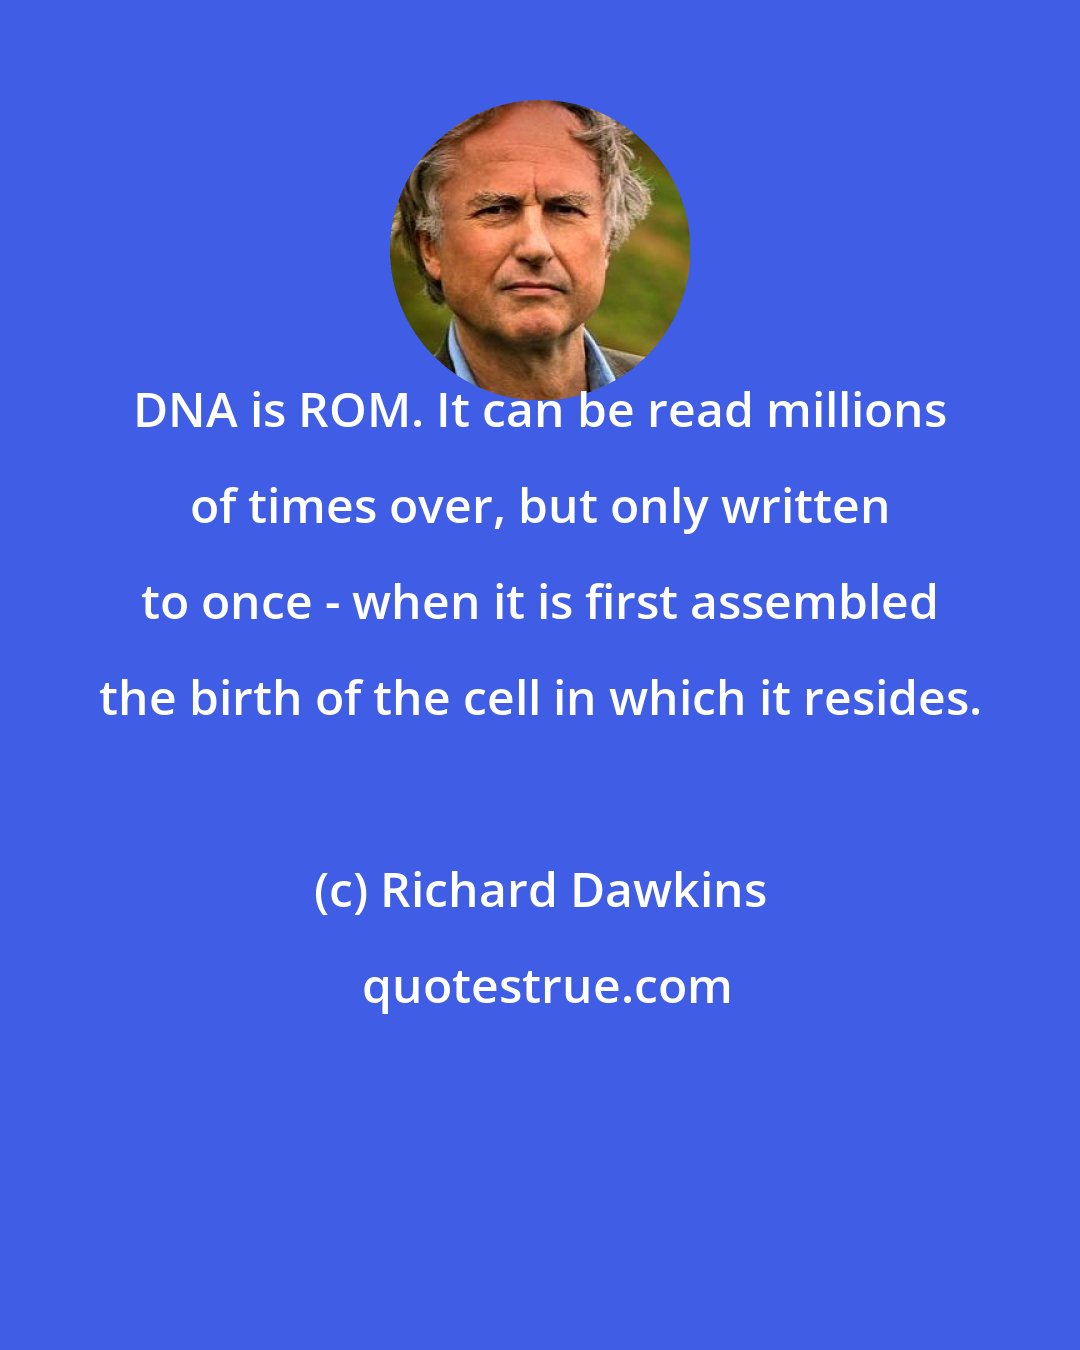 Richard Dawkins: DNA is ROM. It can be read millions of times over, but only written to once - when it is first assembled the birth of the cell in which it resides.